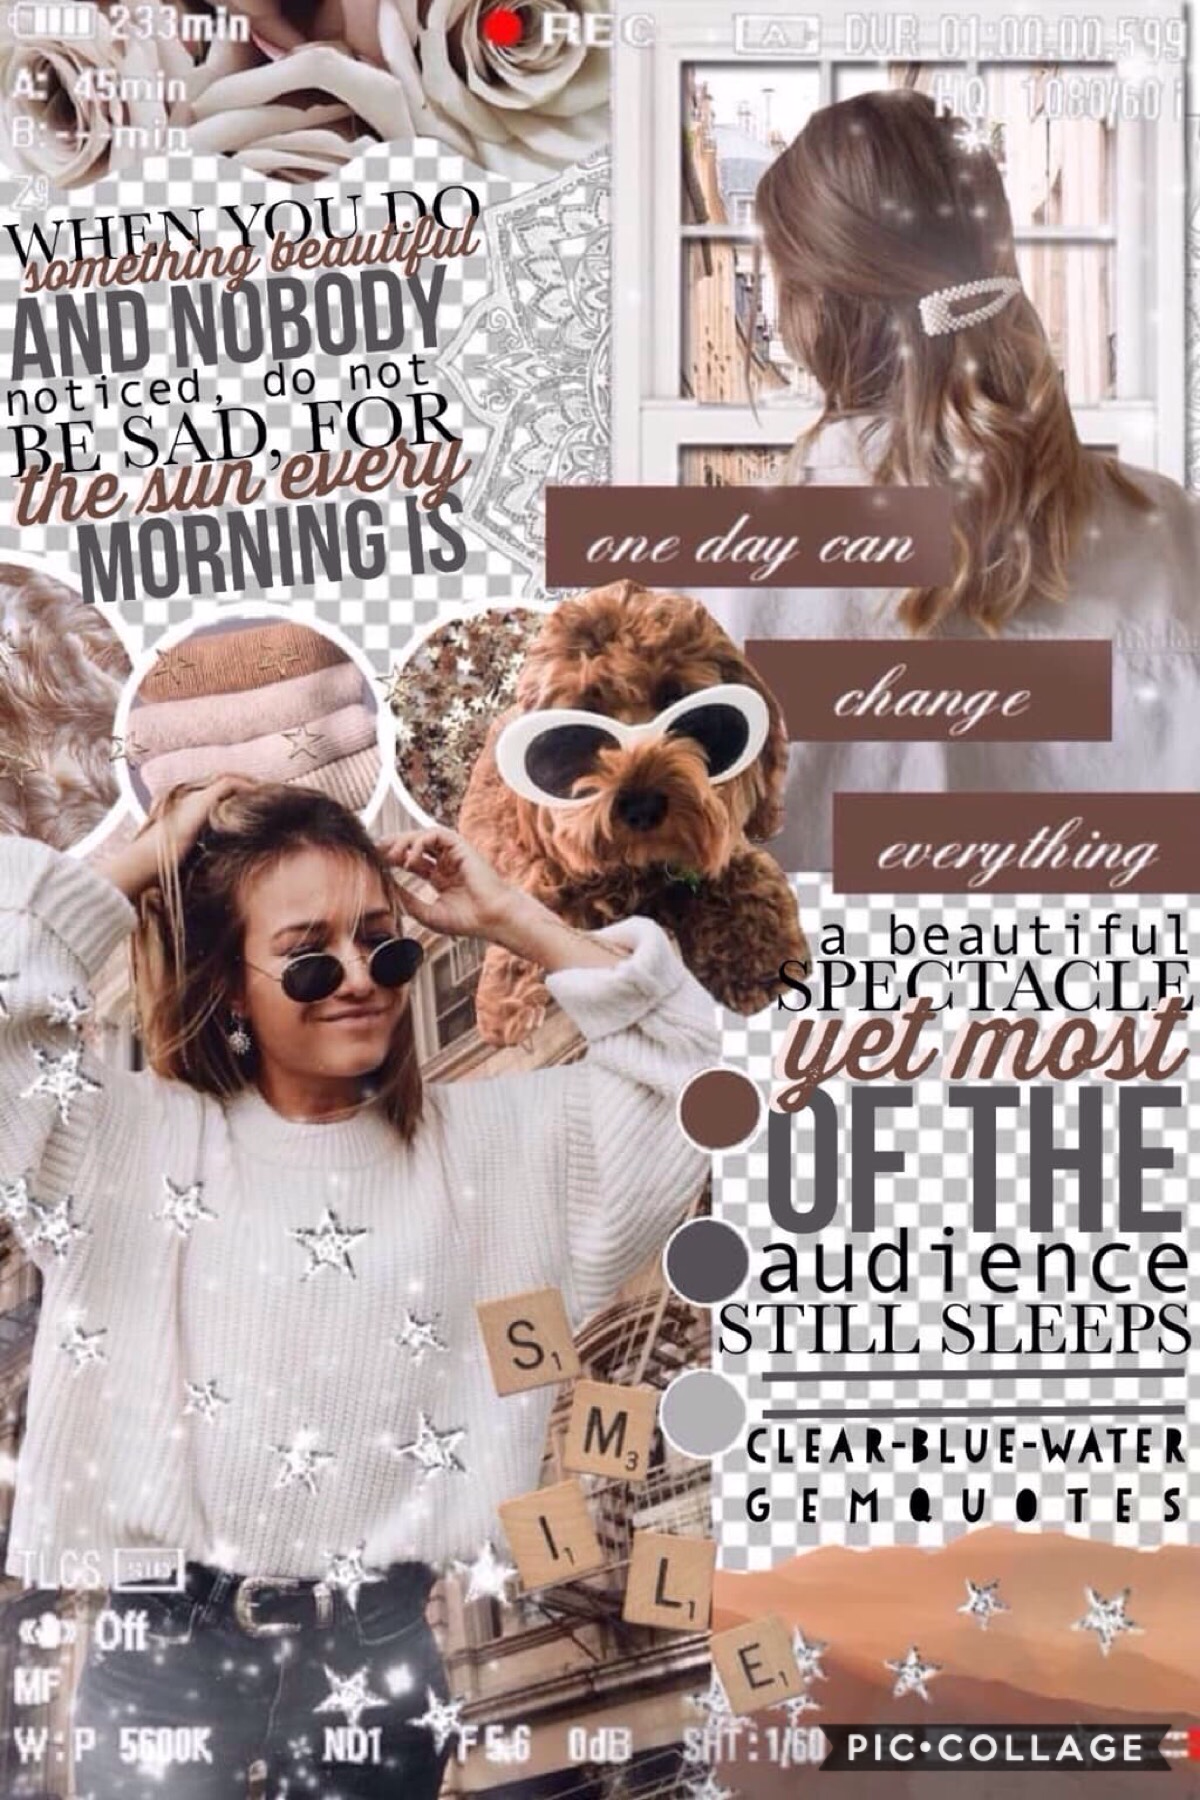 ☕️T A P☕️
Collab with the fabulous GemQuotes, I did the bg and she did the flawless text.
QOTD: What is your favorite coffee place?
AOTD: Starbucks but I actually hate coffee so I just get the non-coffee drinks